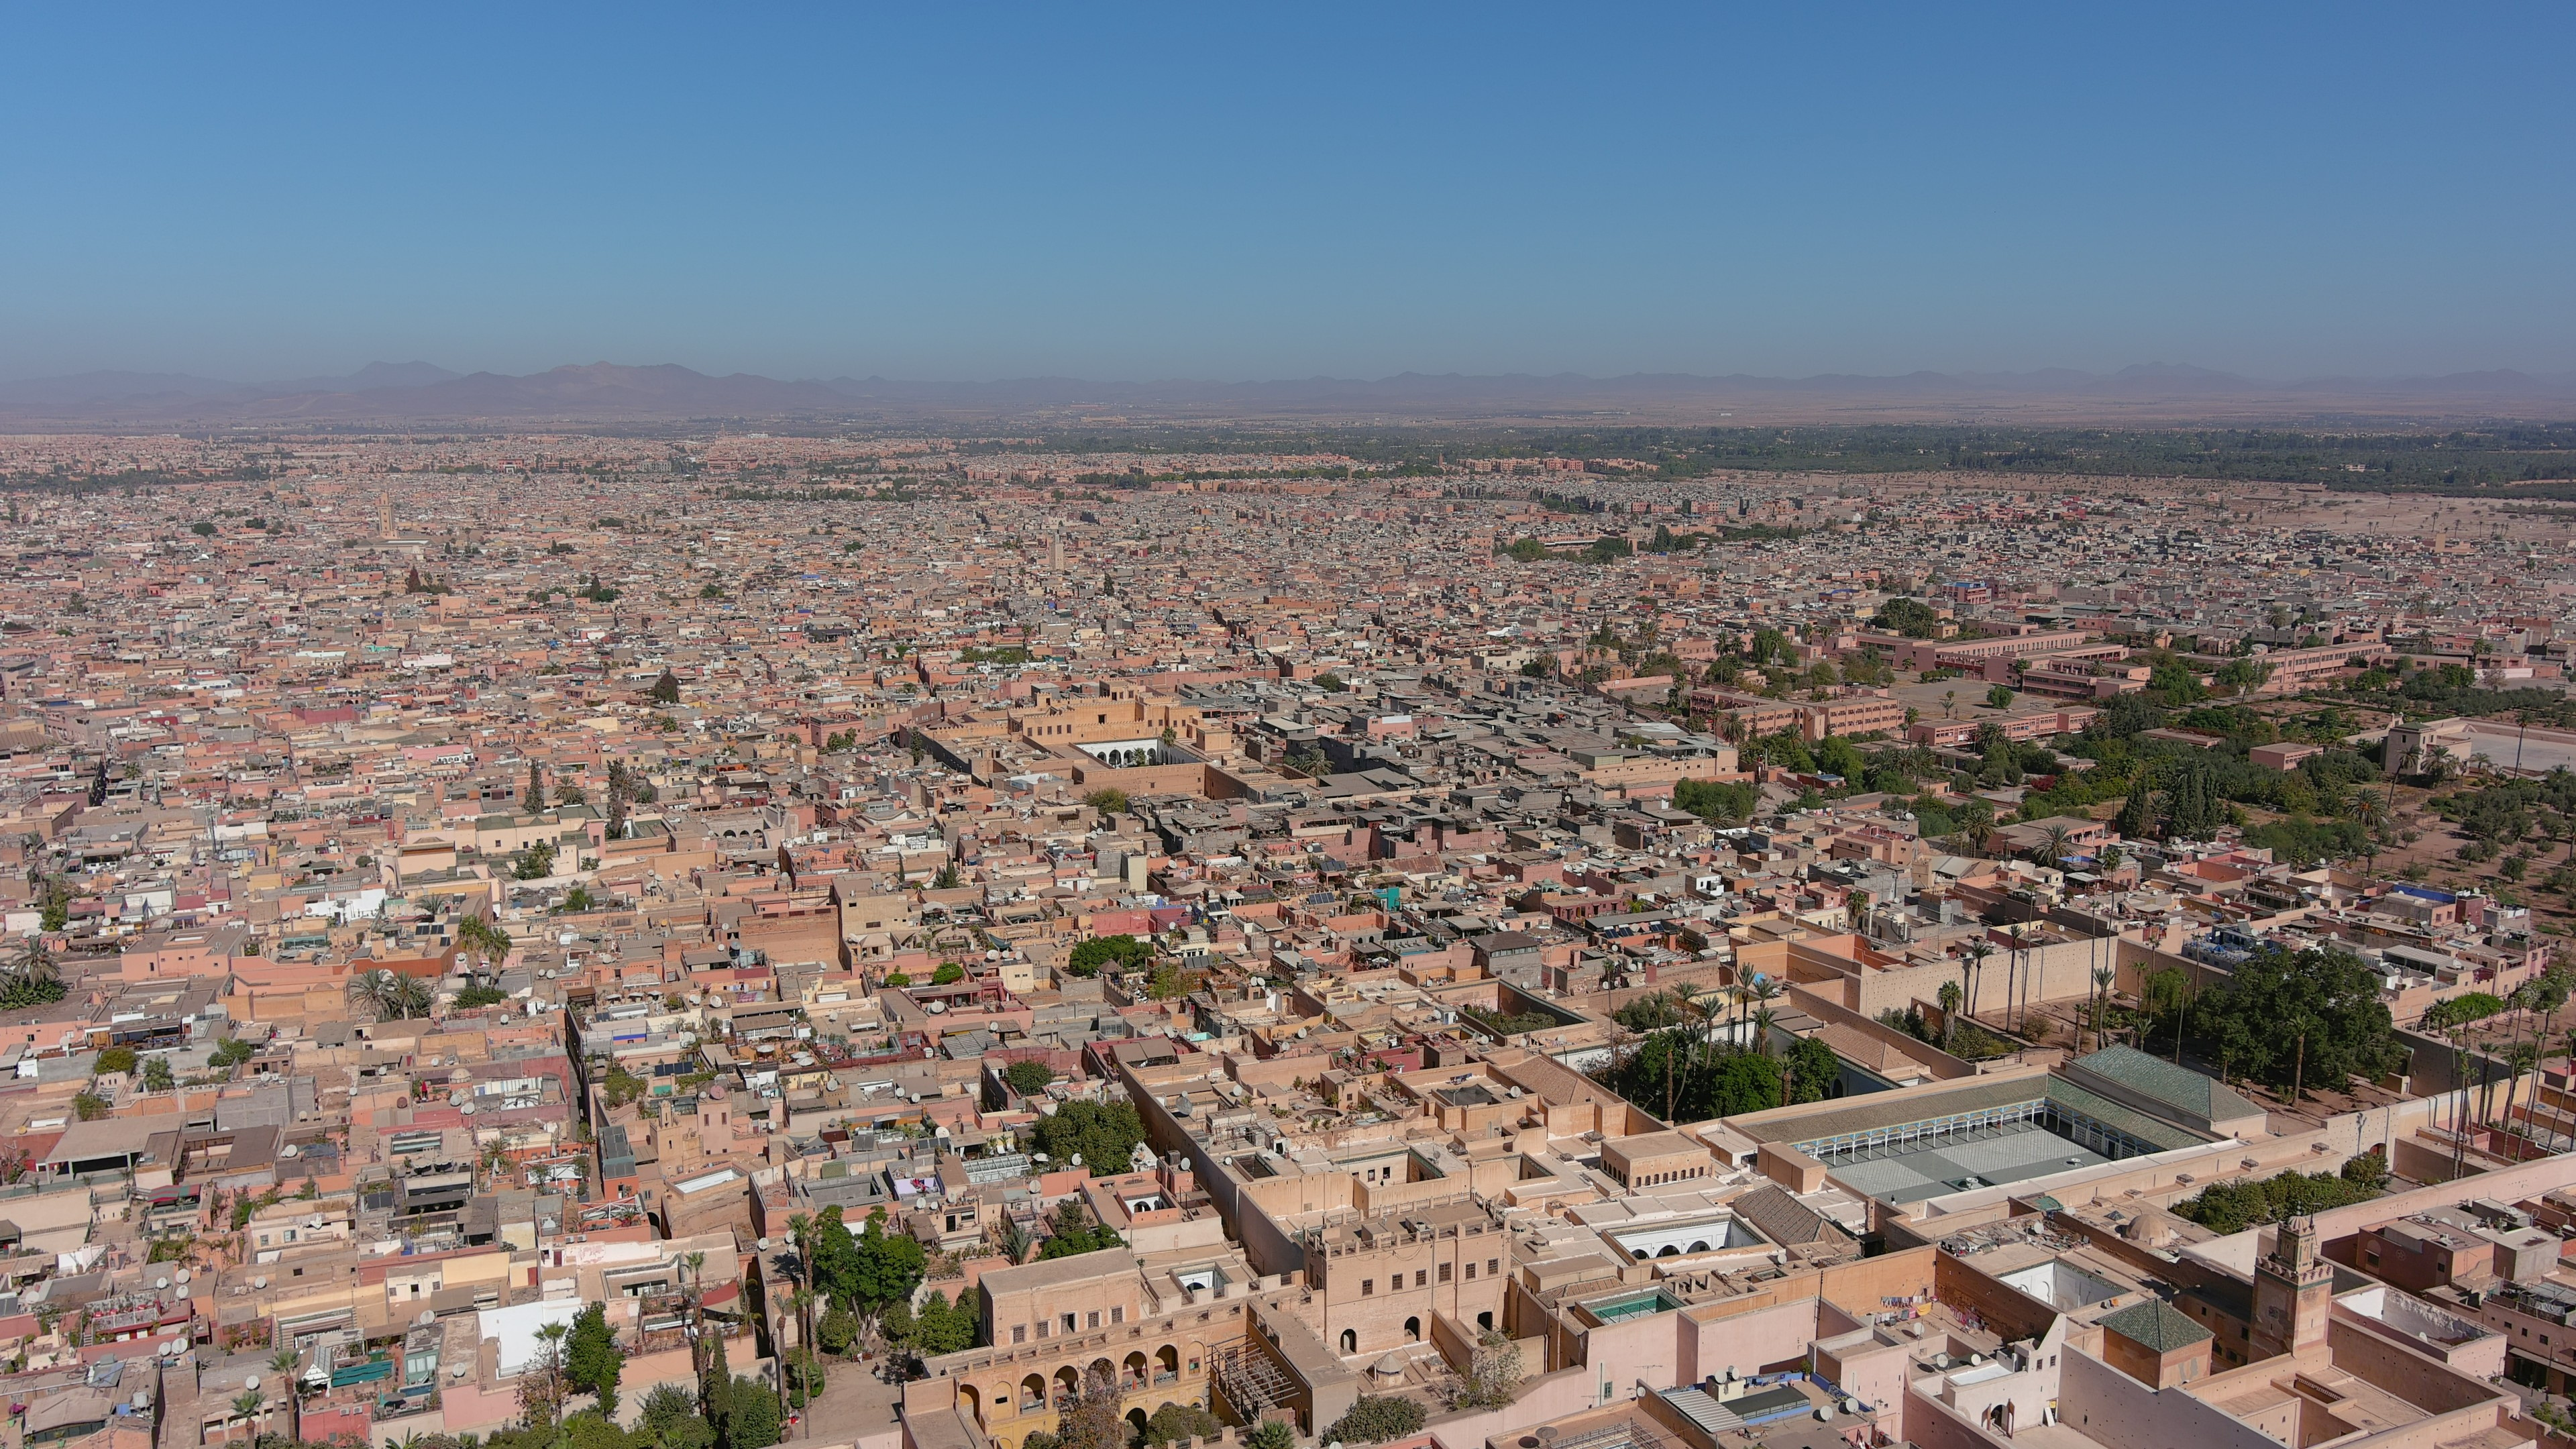 An aerial view of Marrakech, Morocco